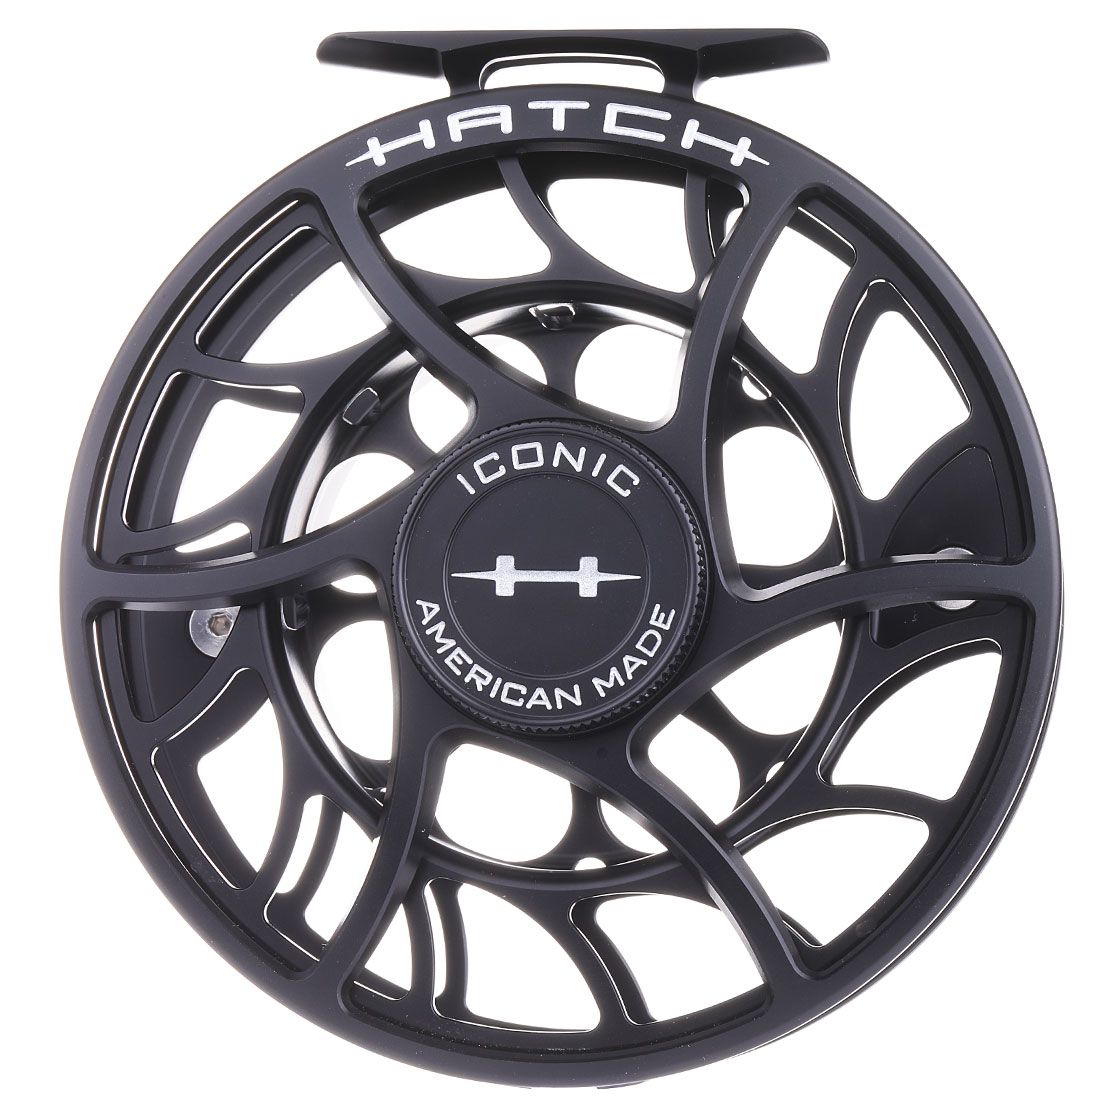 https://www.adh-fishing.com/media/image/75/aa/a3/P-23098_Hatch-Iconic-Fly-Reel-Fliegenrolle-Large-Arbor-black_silver_front.jpg